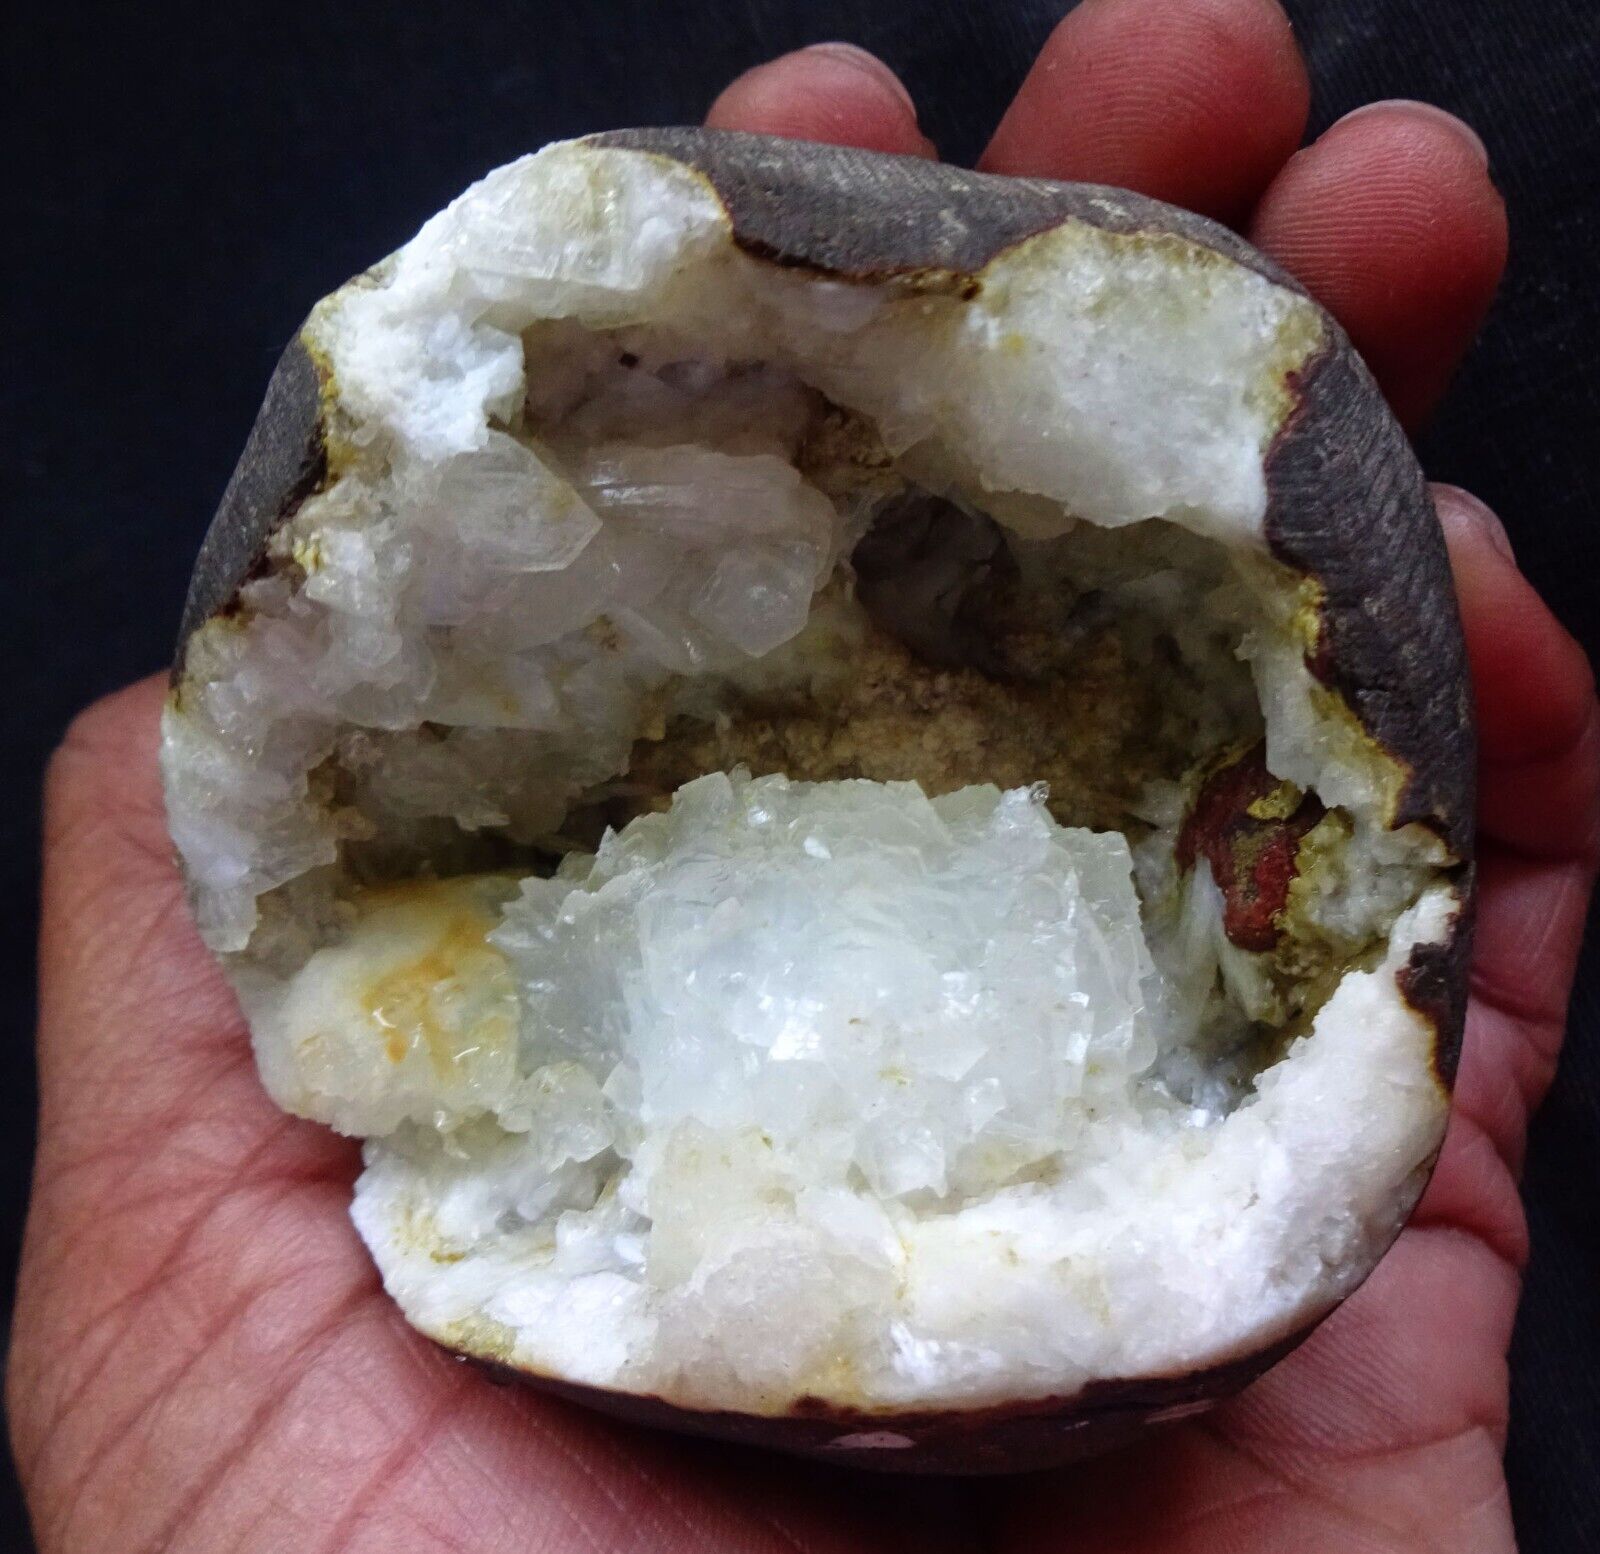 AWESOME RARE GUSOKRATE CRYSTALS BOW W/ STILBITE AND HEULANDITE IN GEODE MATRIX-6